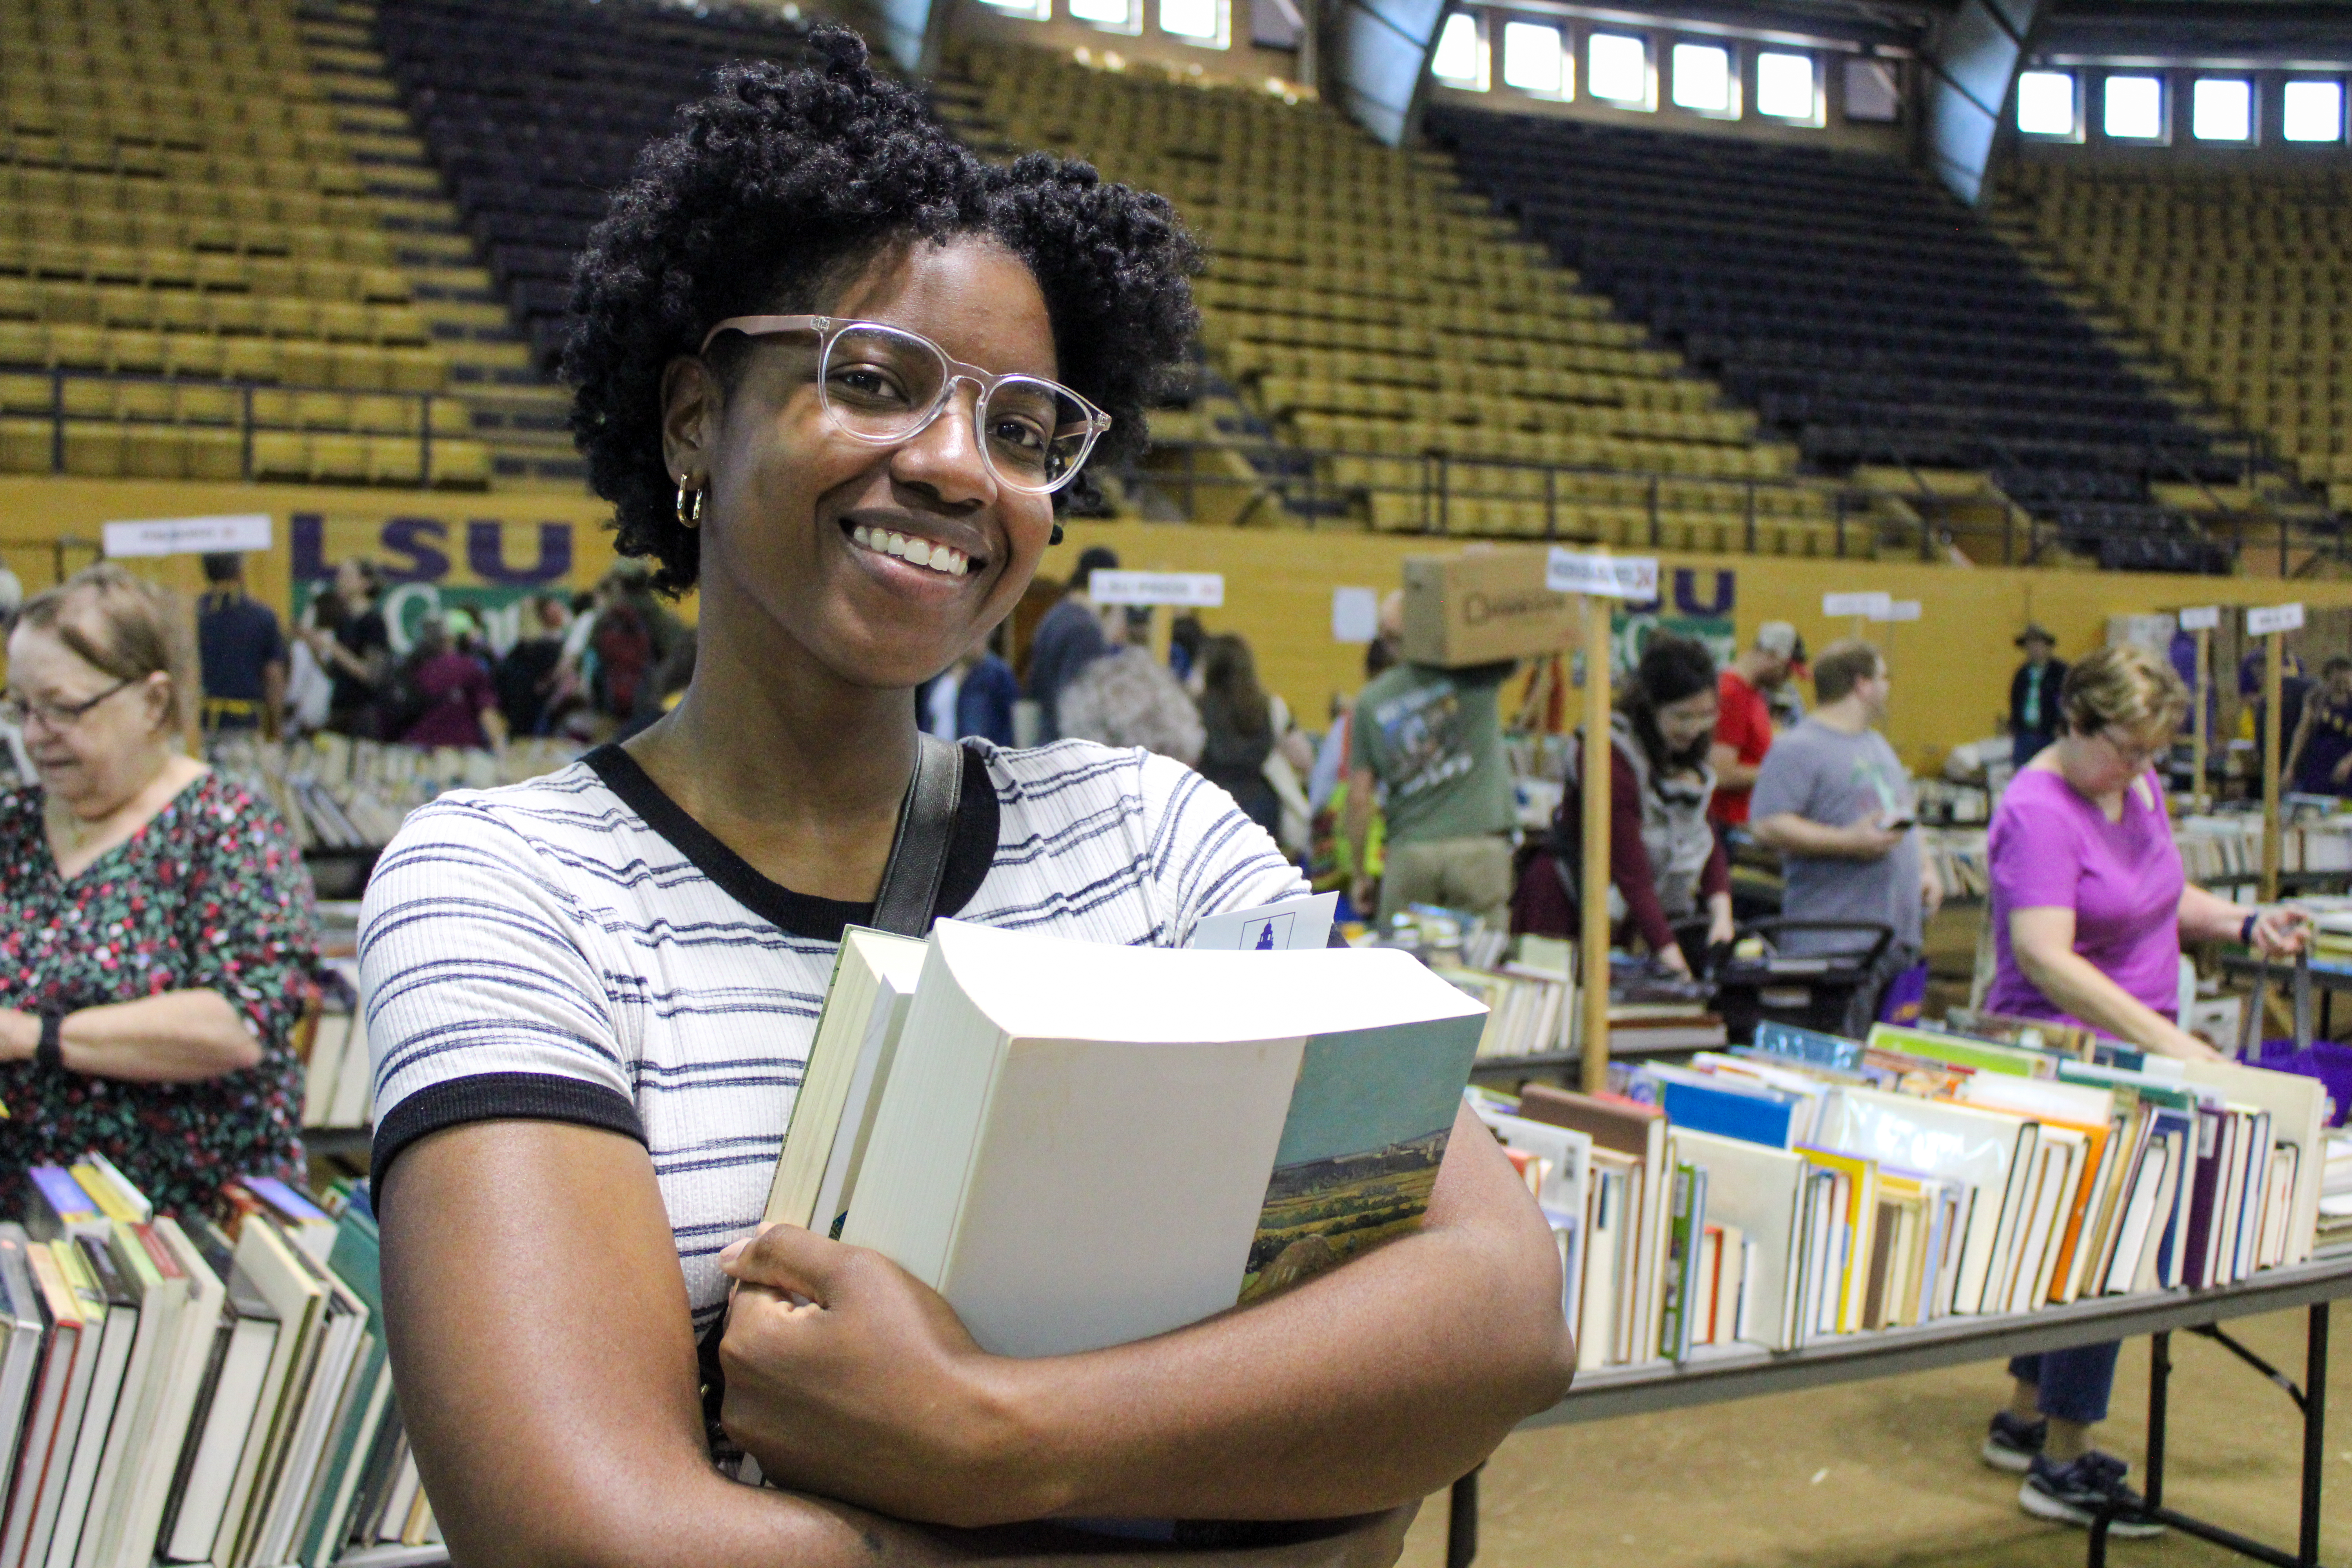 a woman smiles with a stack of books in her arms